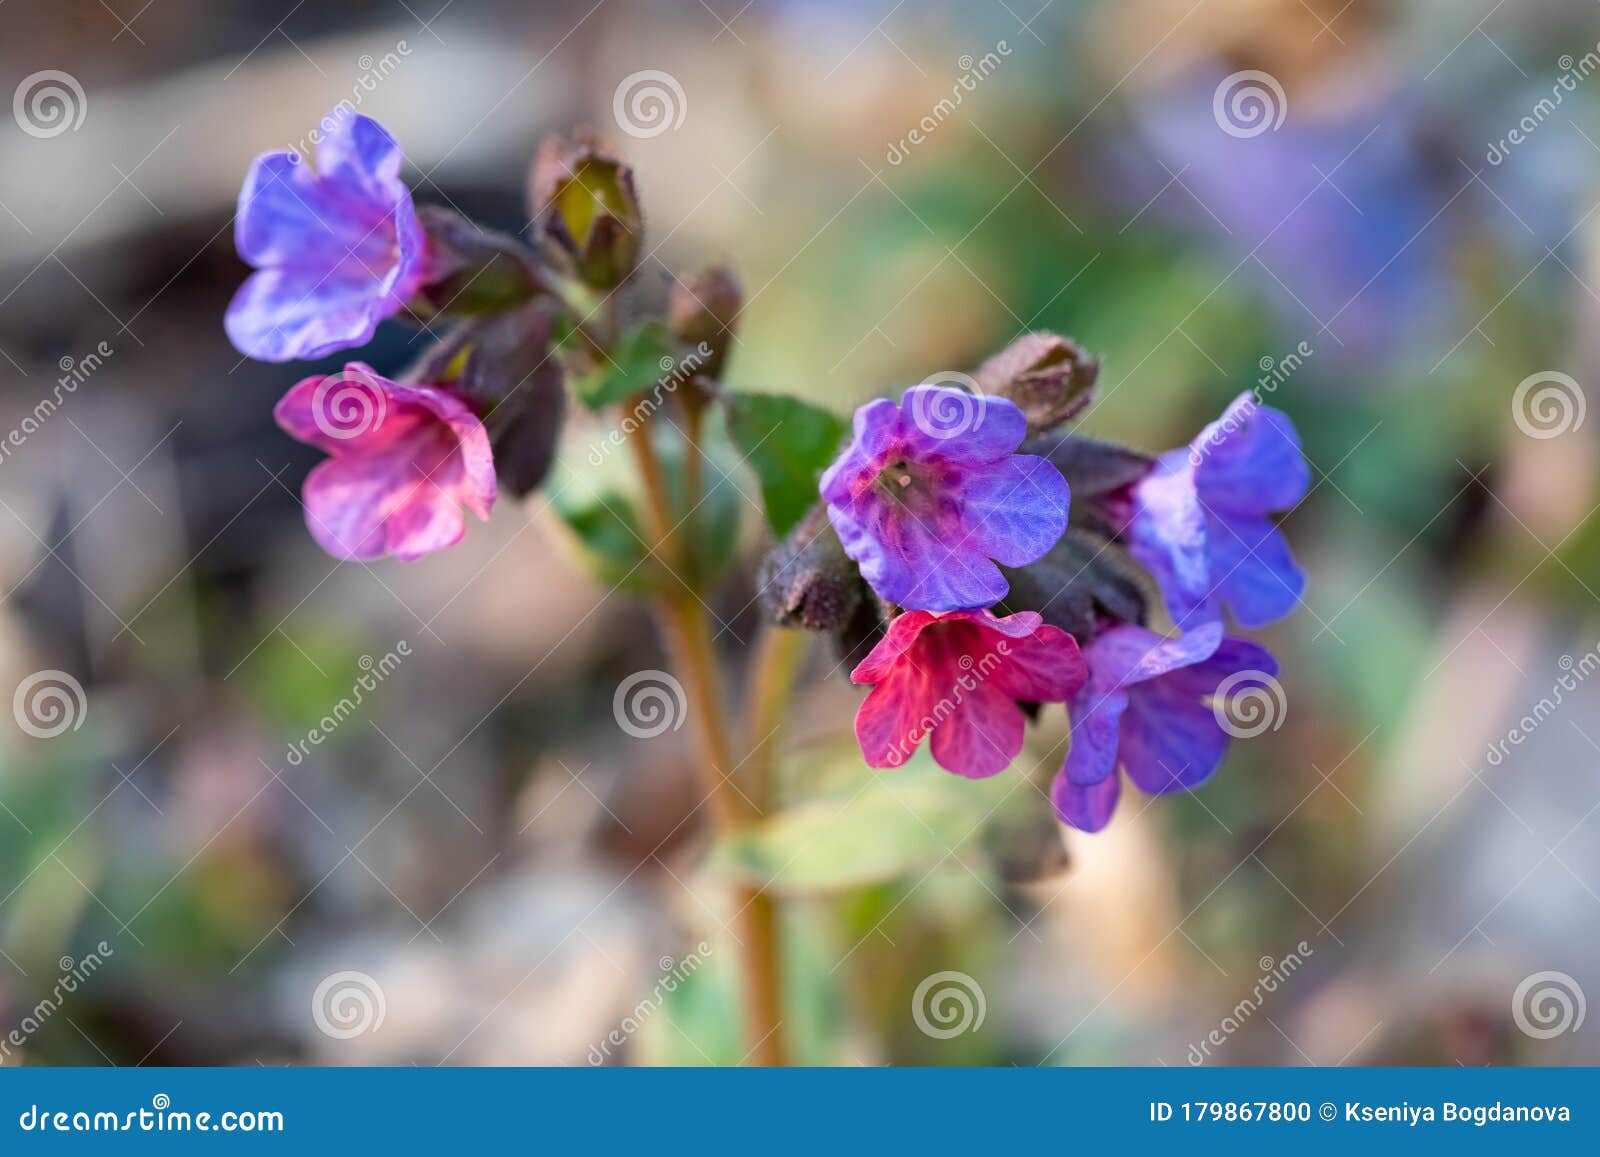 The Flower of Lungwort, Pulmonaria Officinalis Stock Photo   Image ...